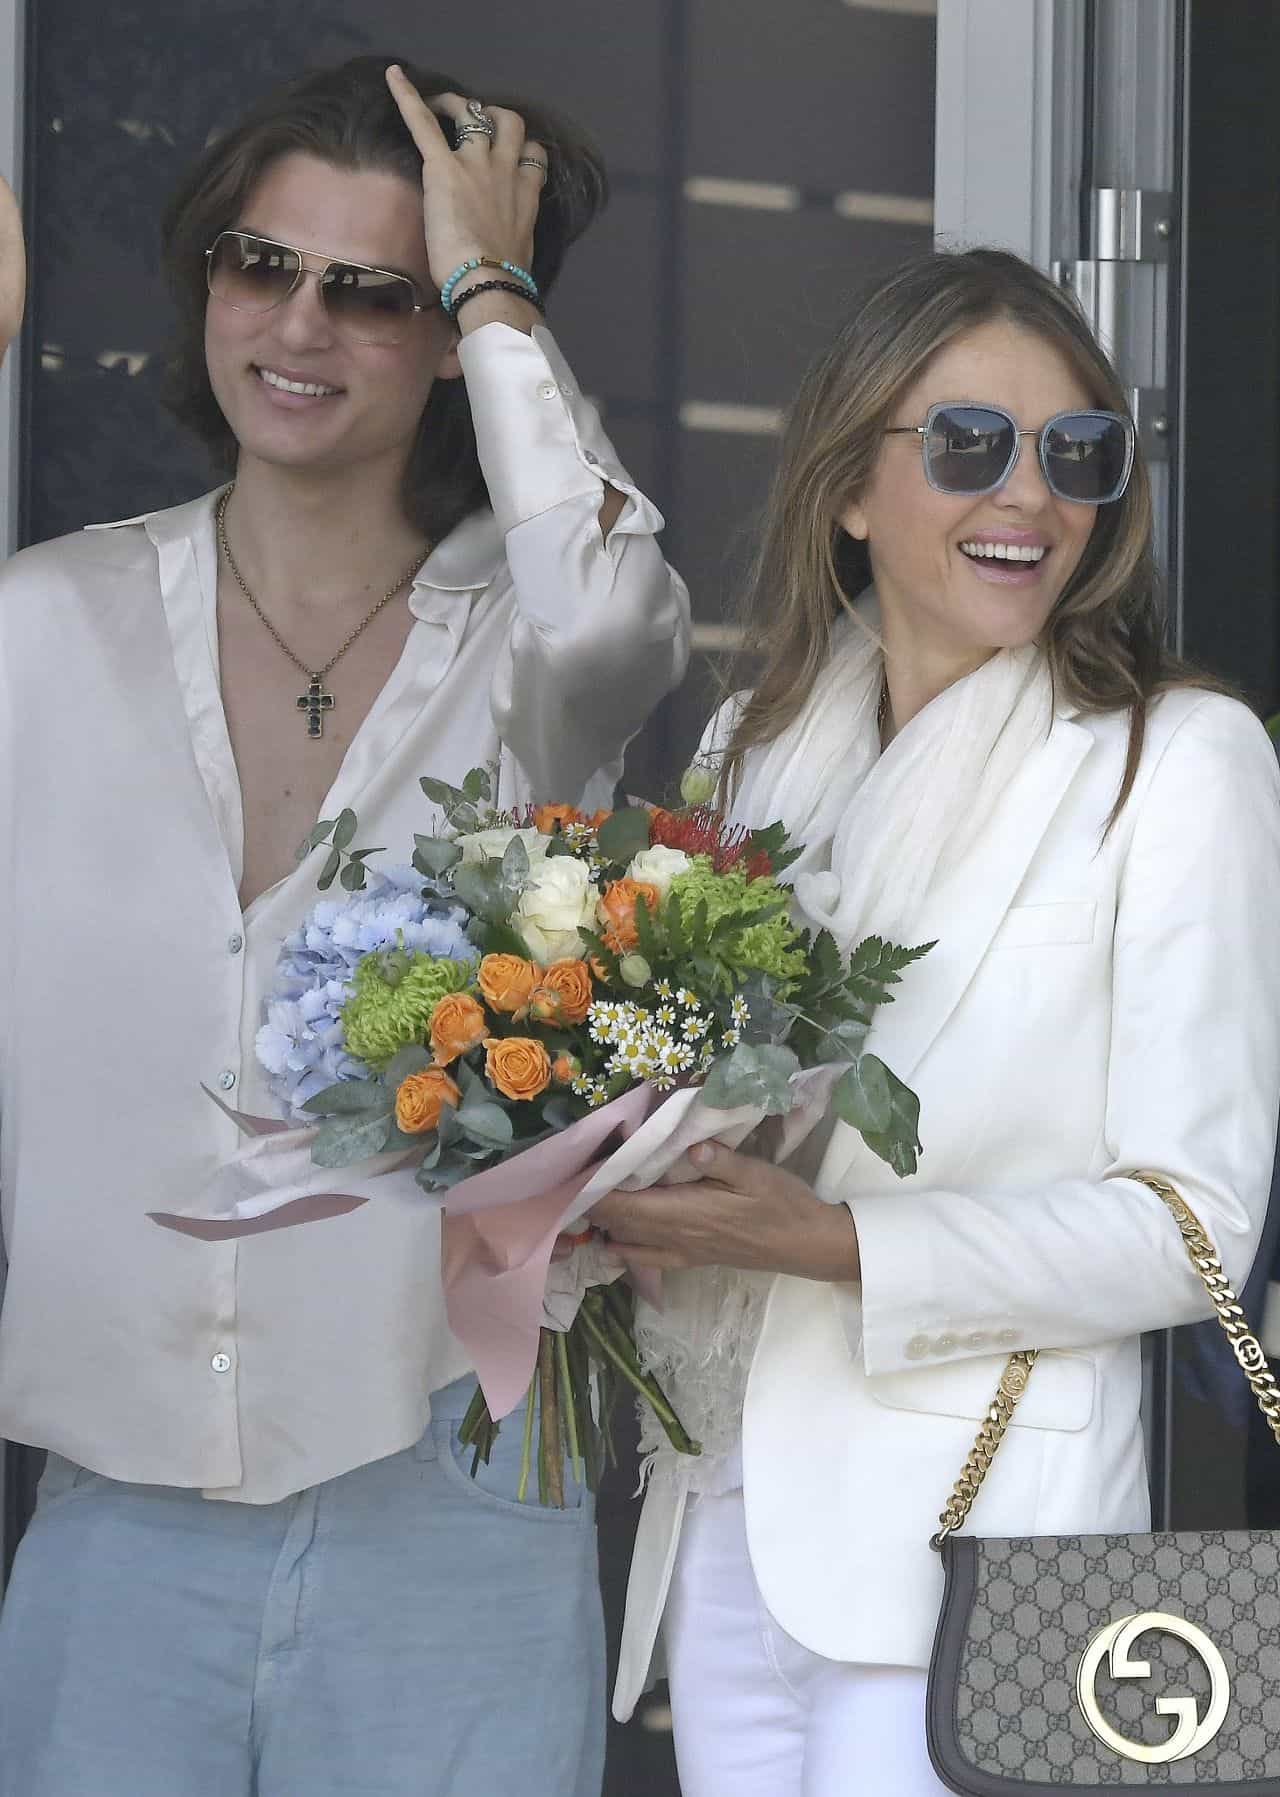 Elizabeth Hurley and Son Damian Look Stylish in Matching White Outfits